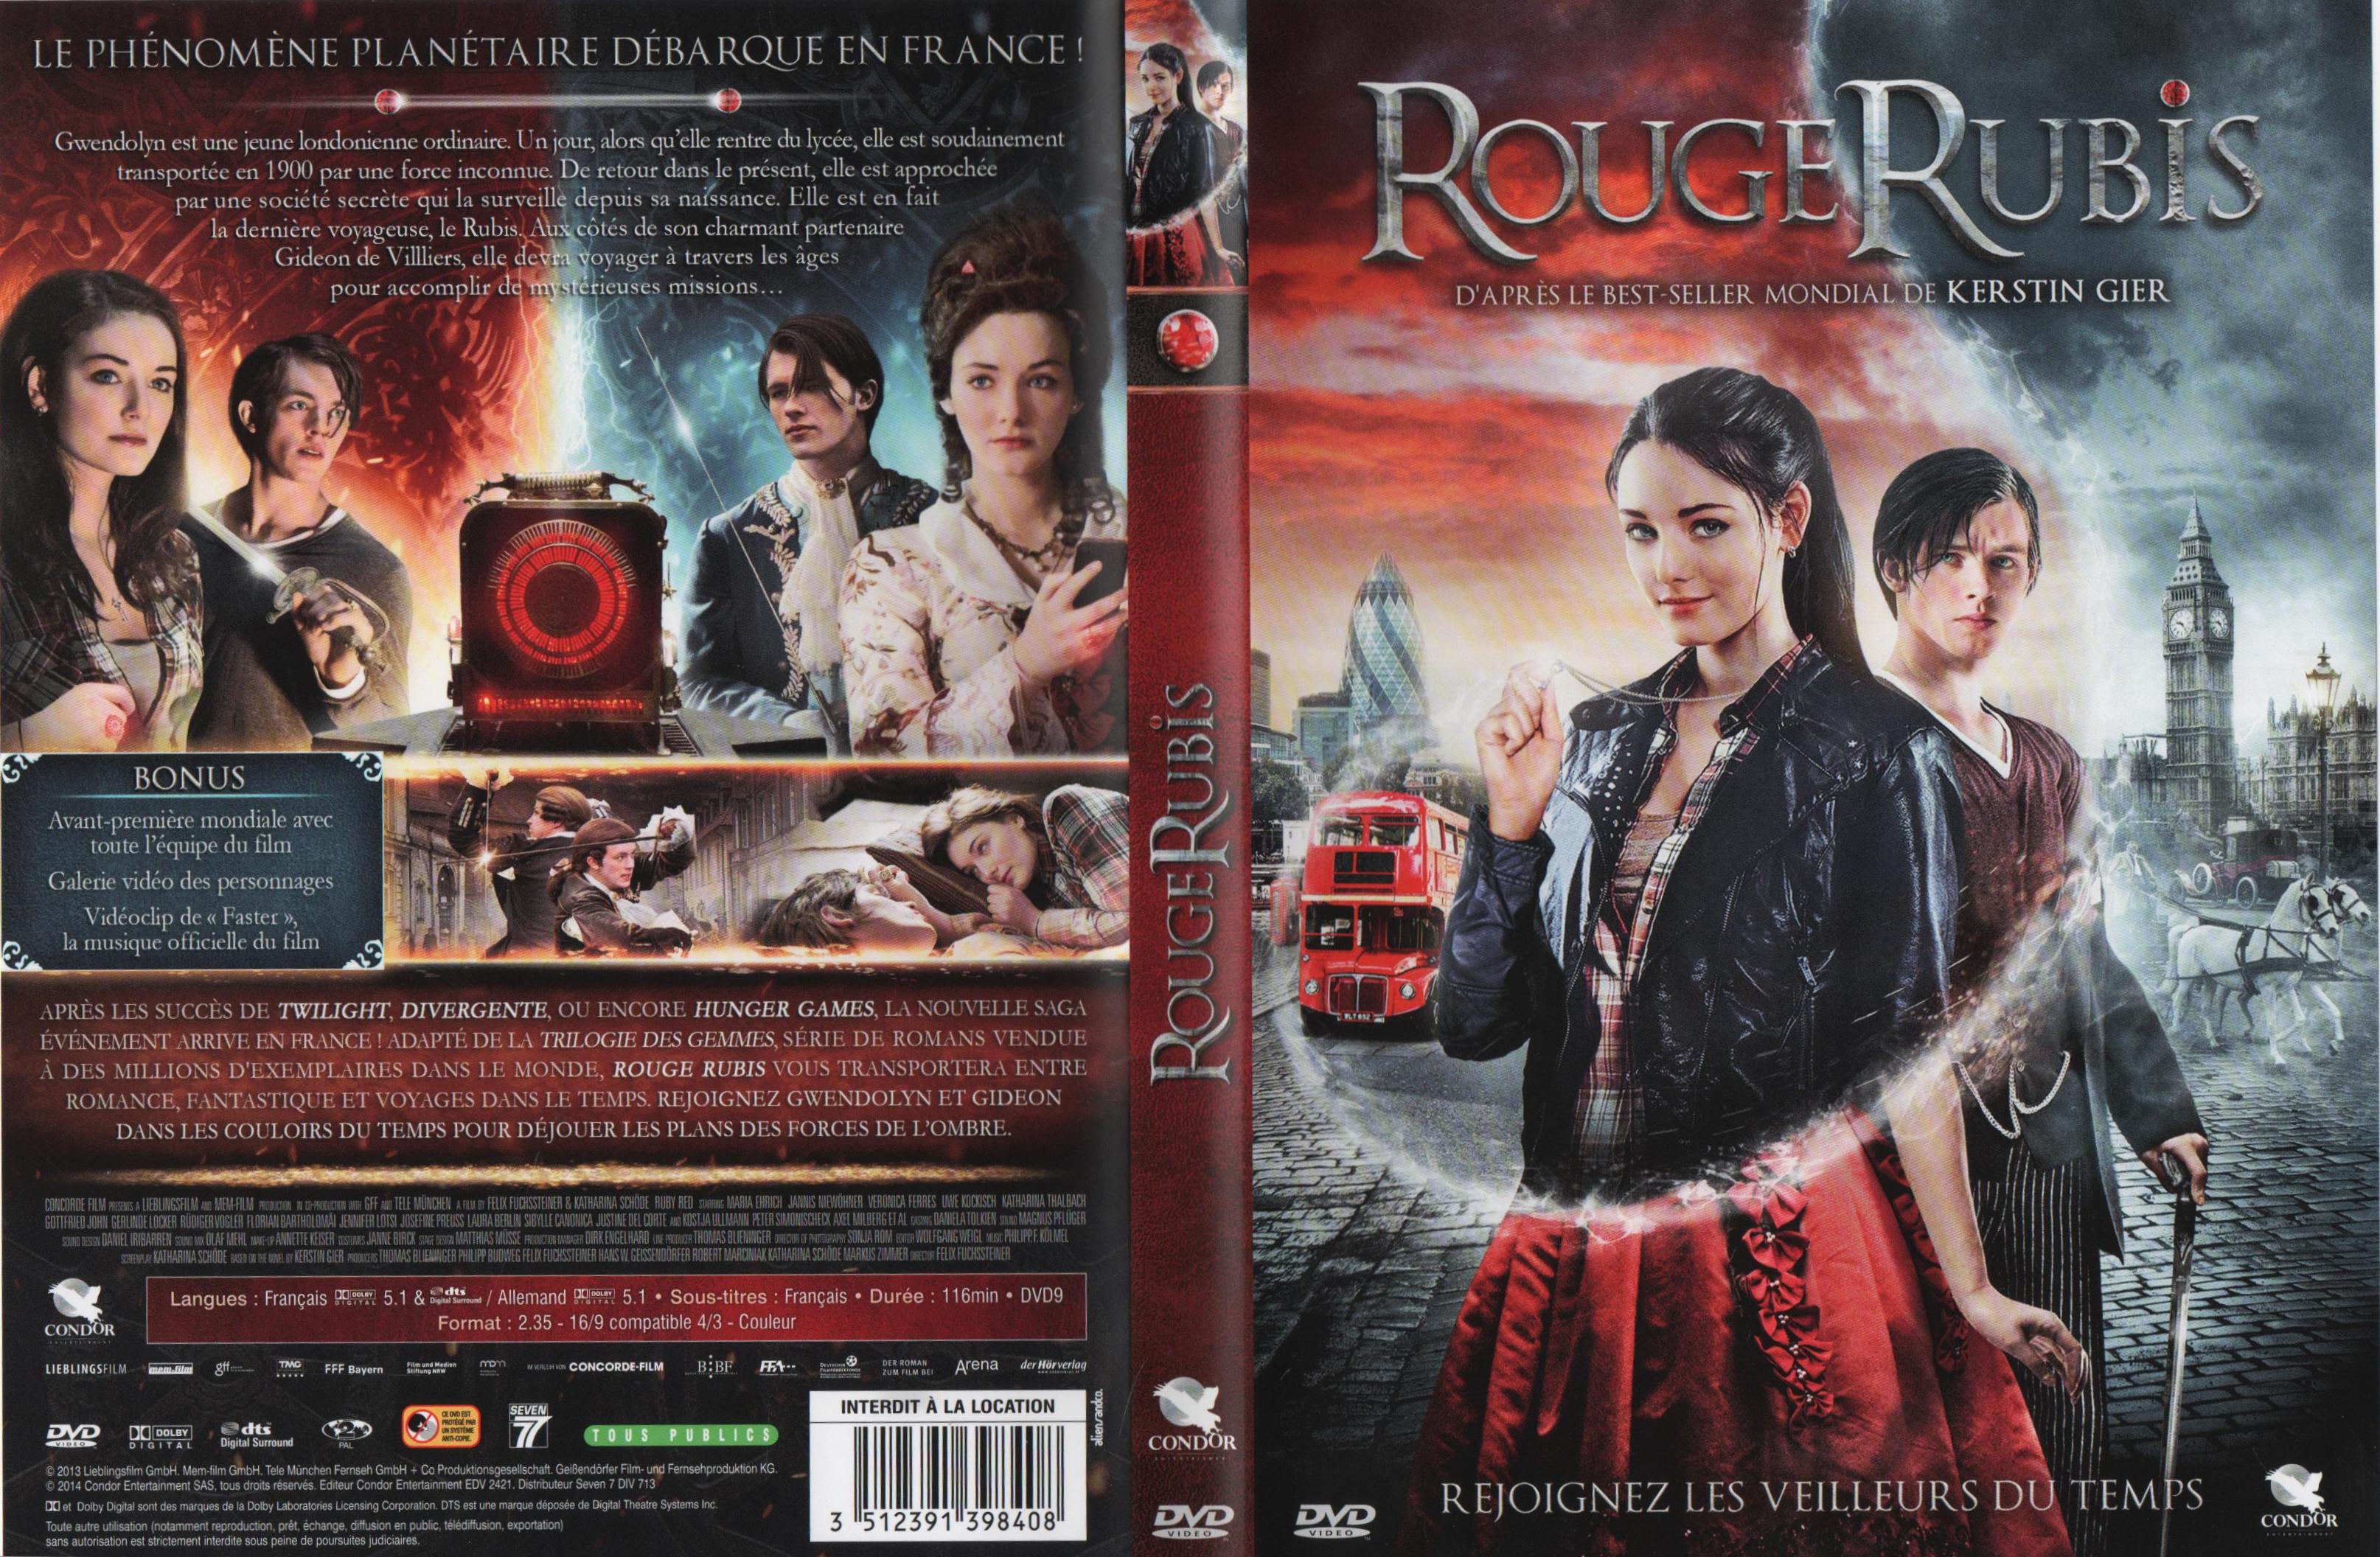 Jaquette DVD Rouge Rubis